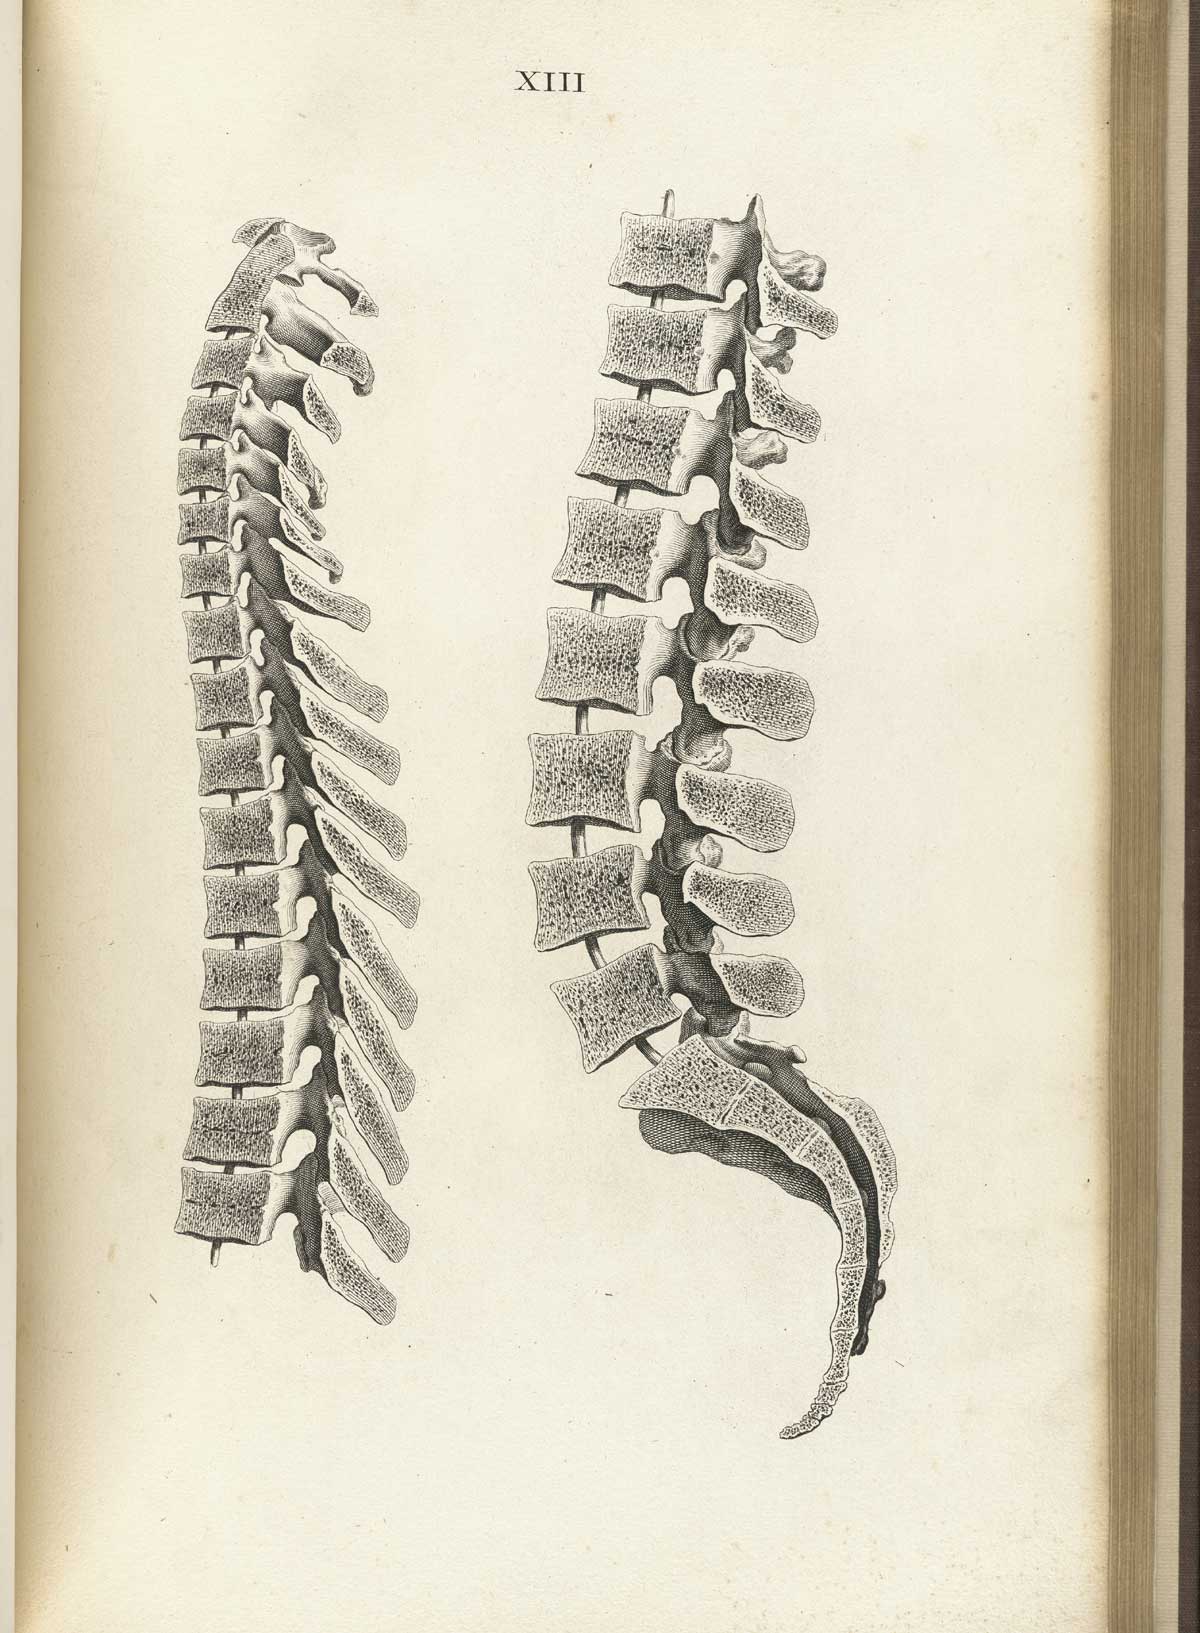 Engraving of cross-sections of the lumbar, sacral, and coccygeal vertebrae together on the right of the image and the thoracic and cervical vertebrae on the left, from William Cheselden’s Osteographia, NLM Call no.: WZ 260 C499o 1733.